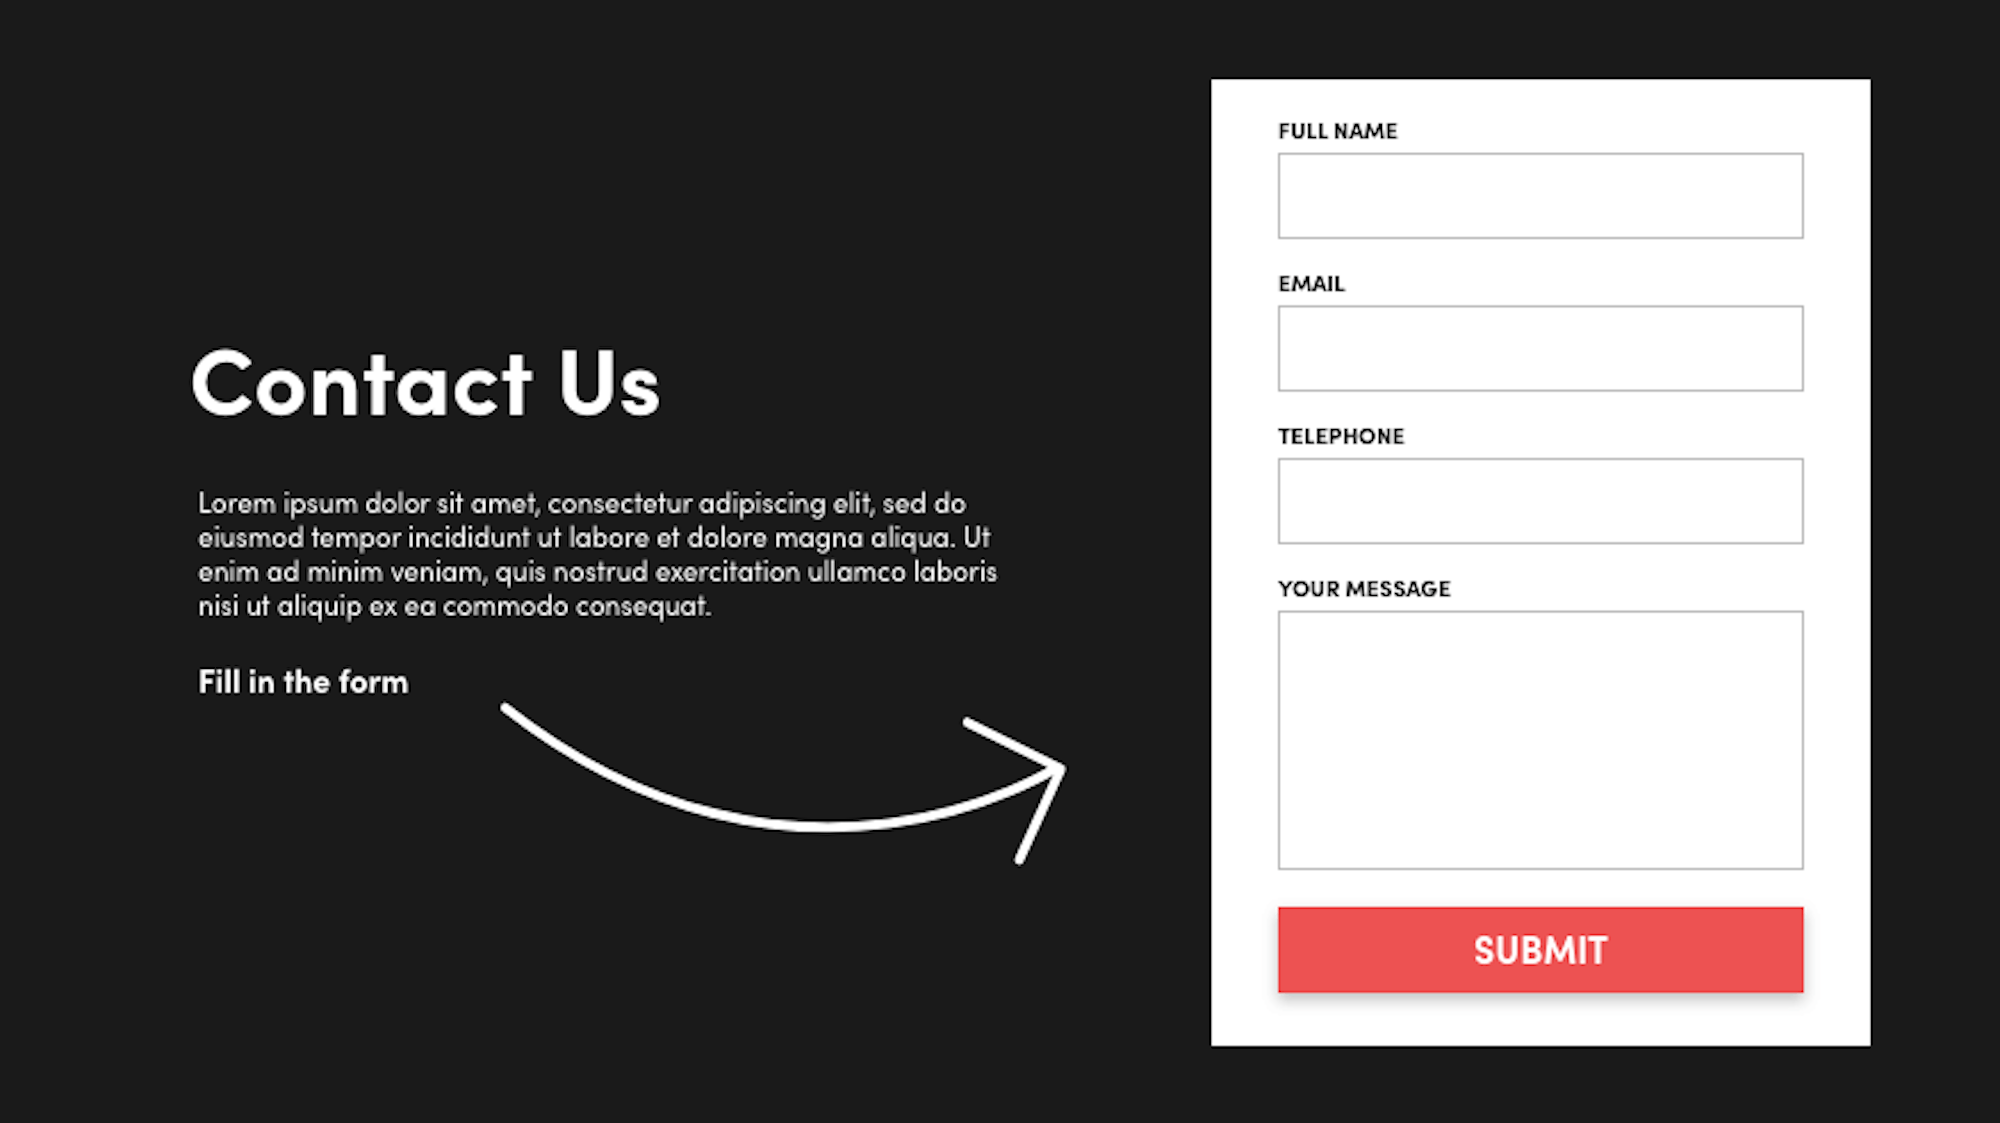 Example of what an effective contact form might look like